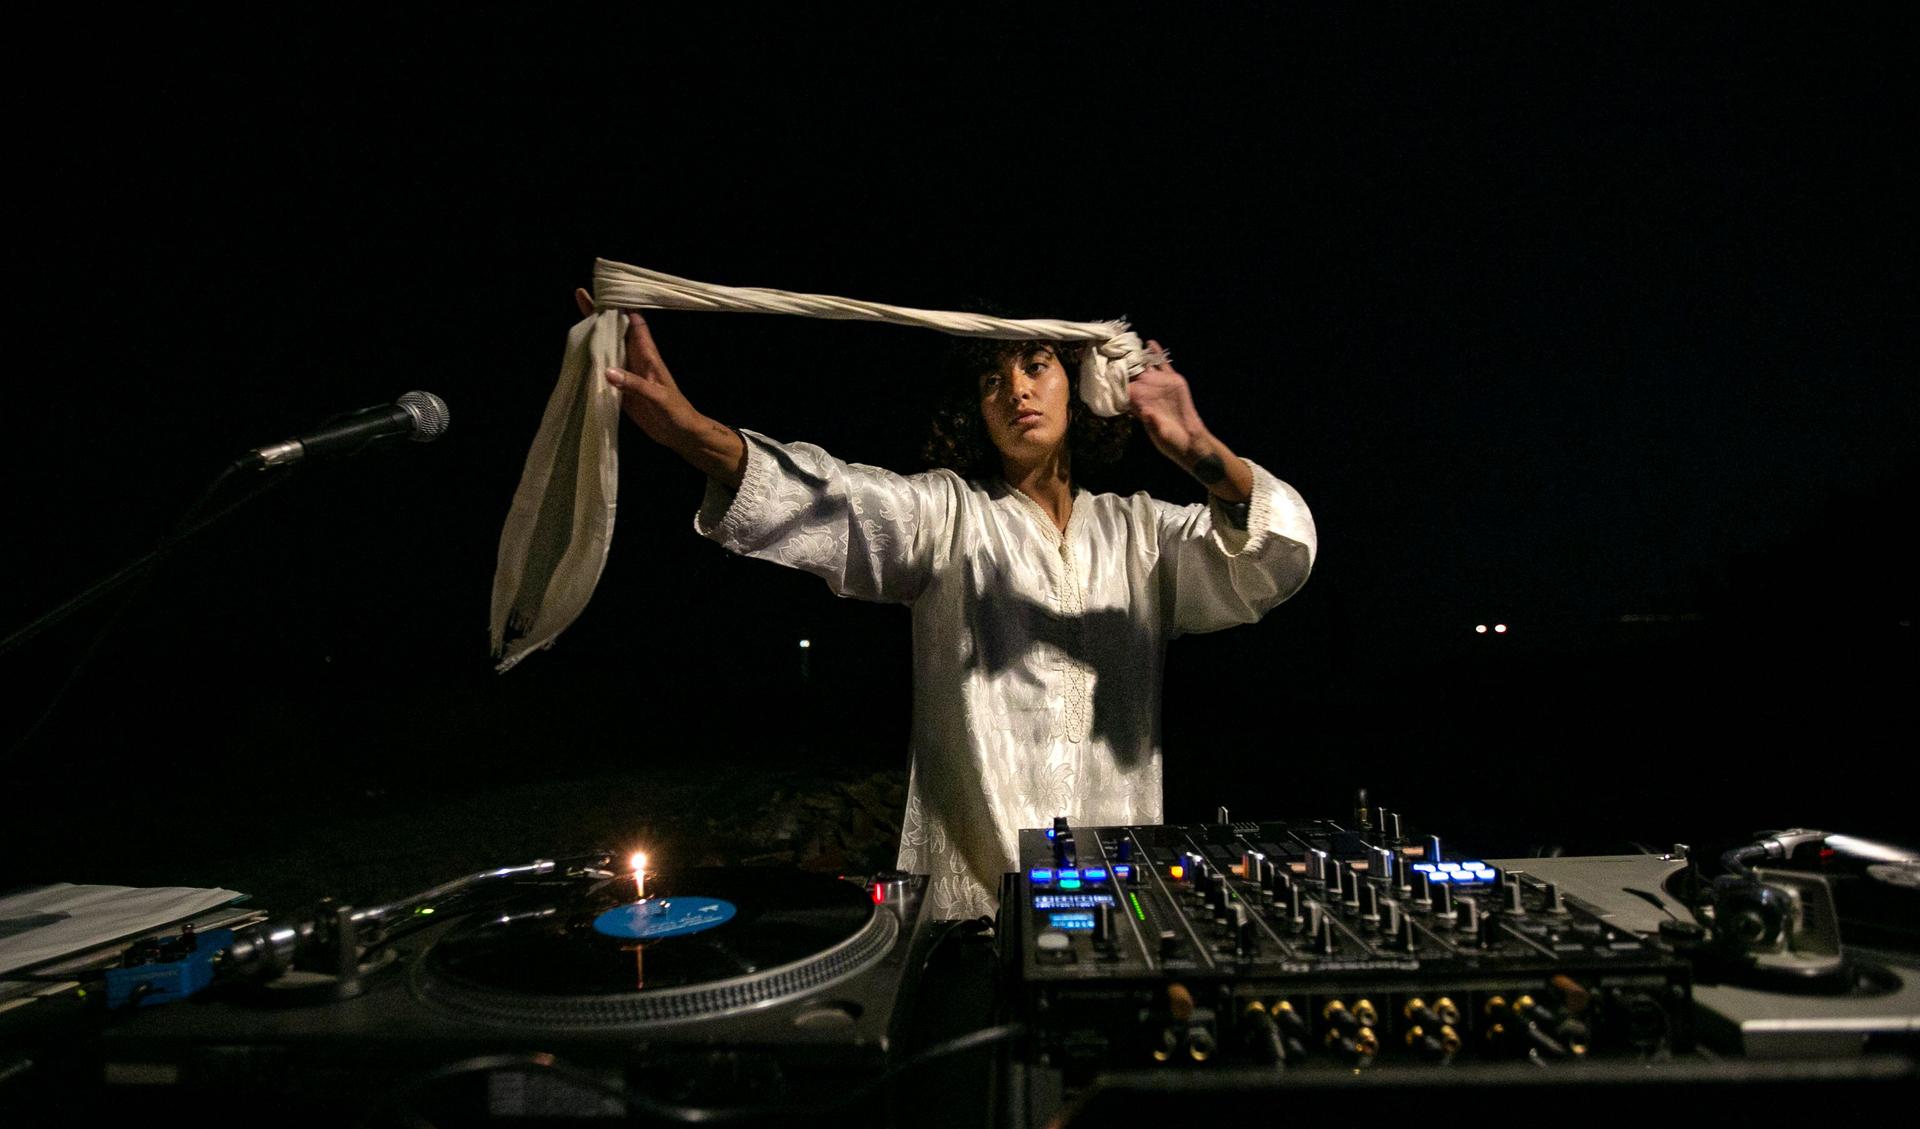 The artist Leila Bencharnia is playing at DJdesks in the nighttime and holds a scarve in her hands